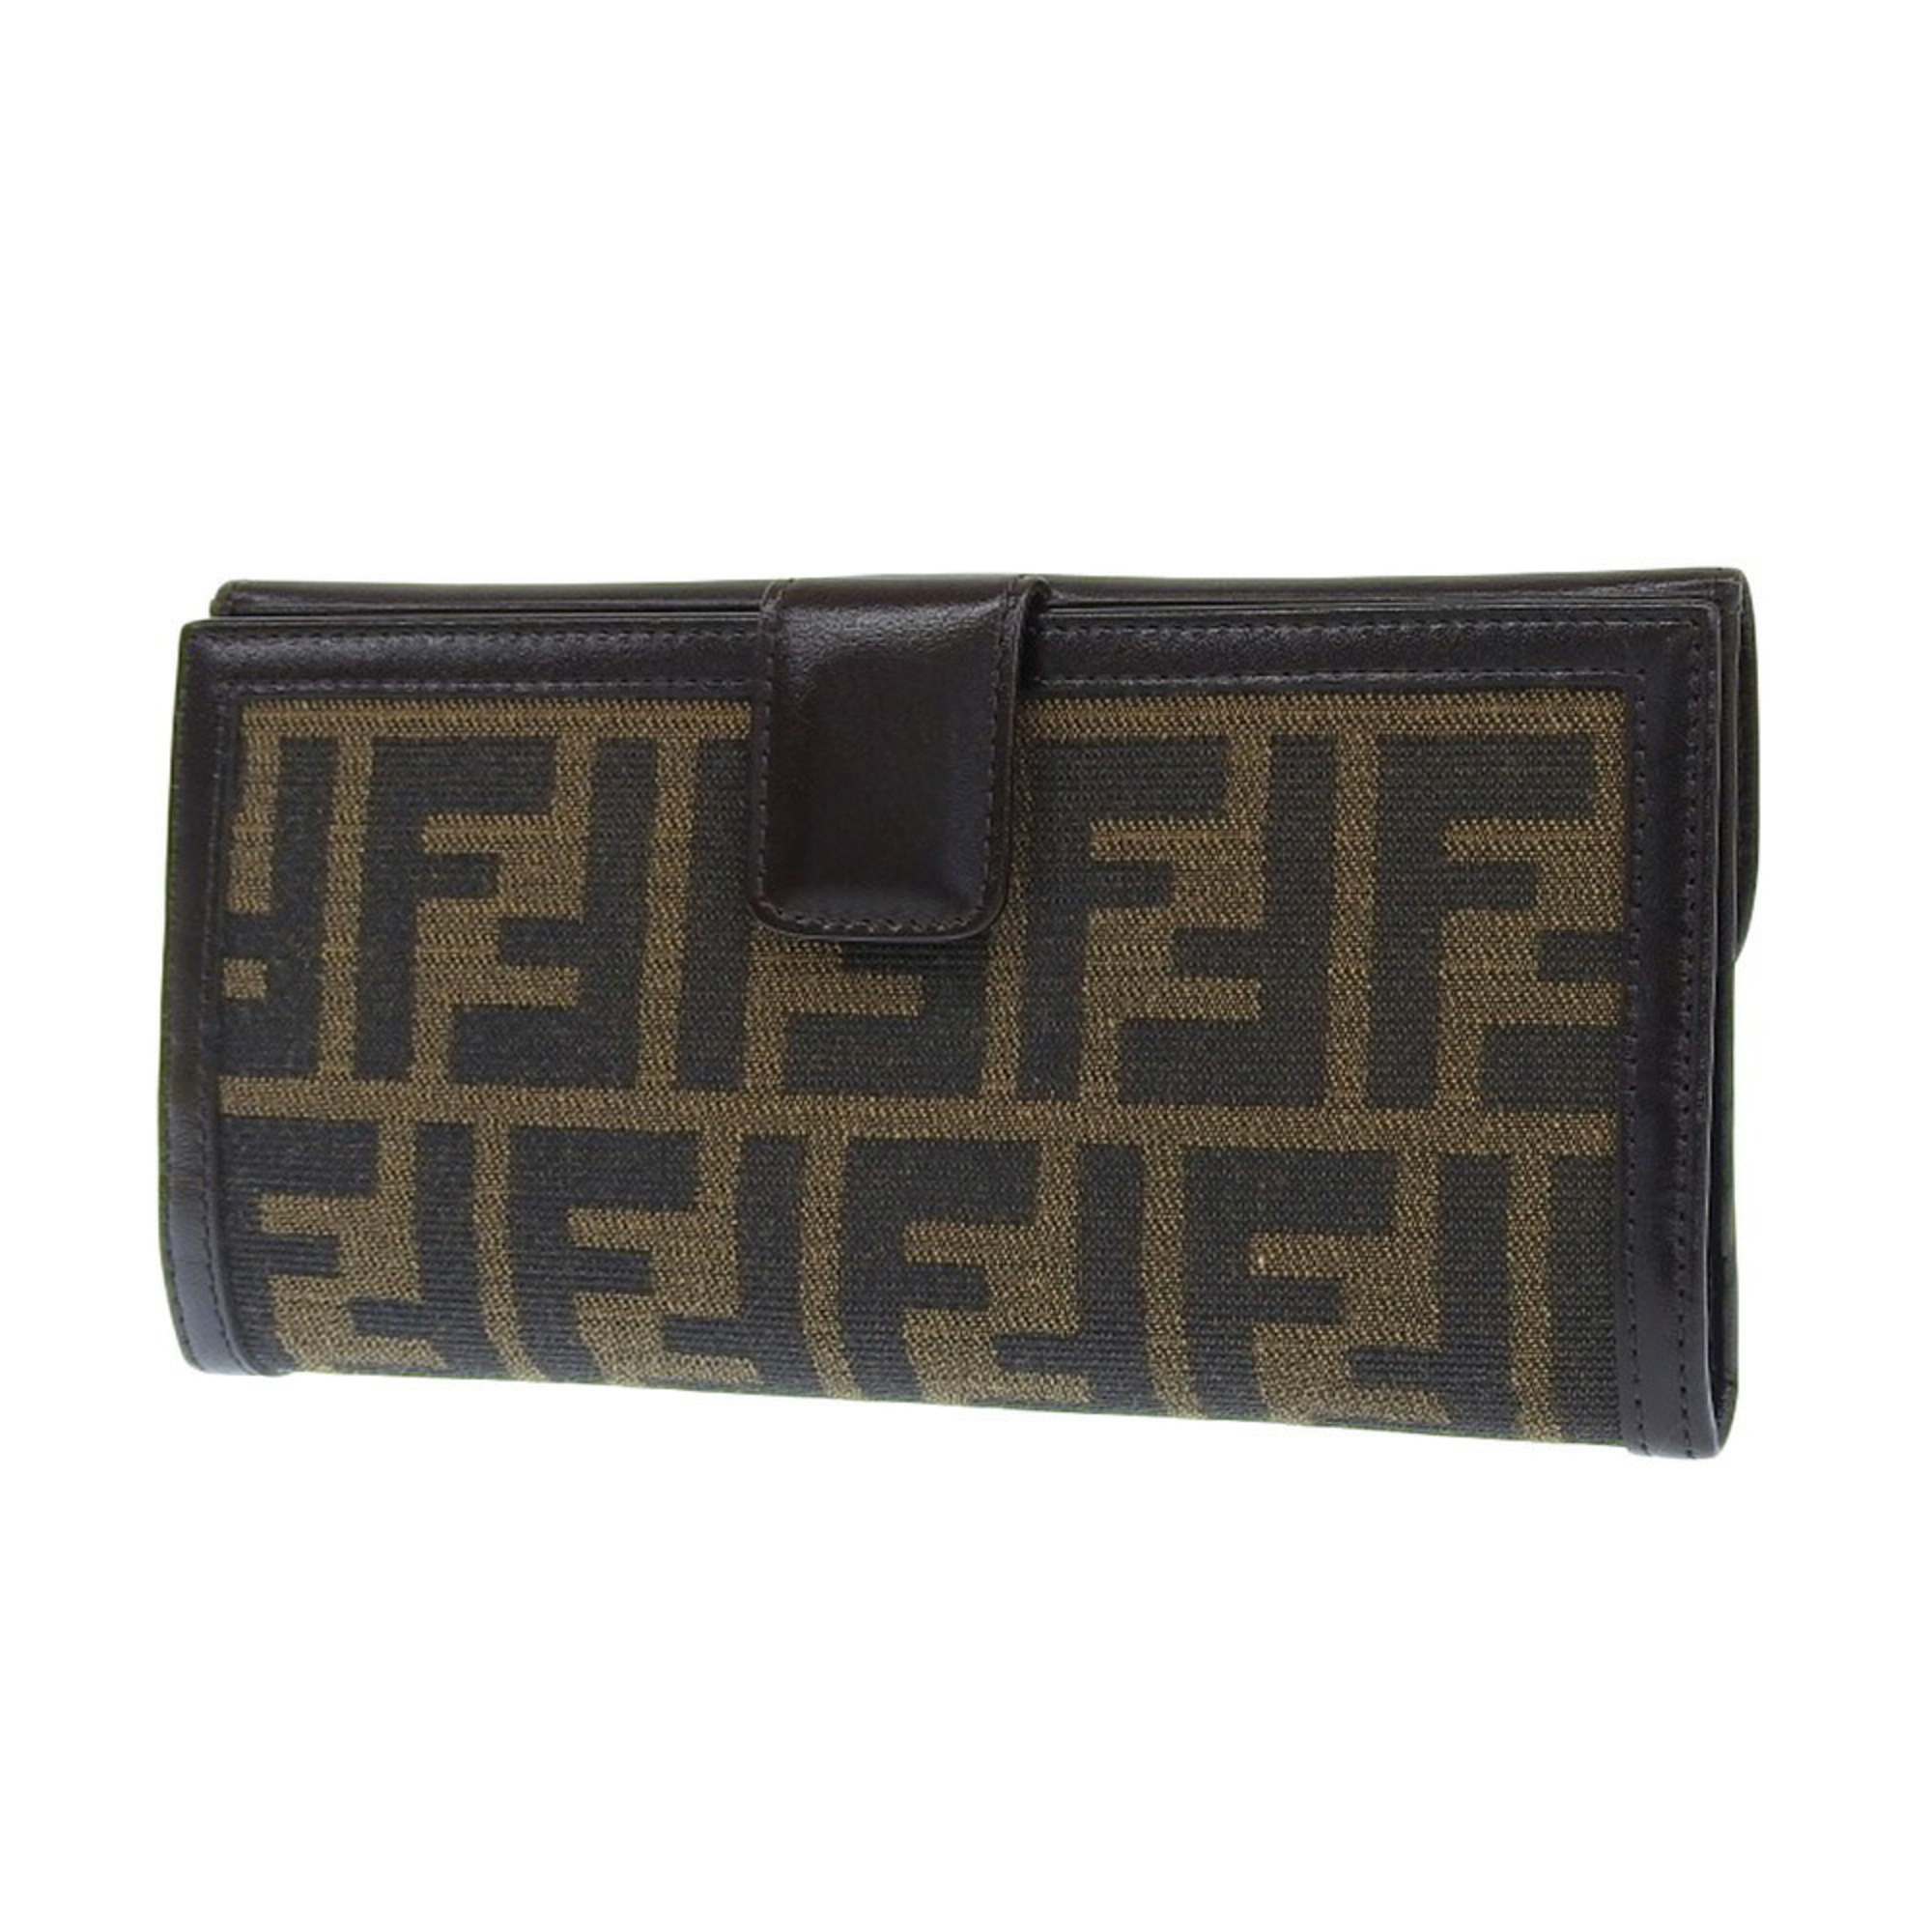 Fendi Zucca pattern FF long wallet with W canvas leather brown 2804 0339R 018